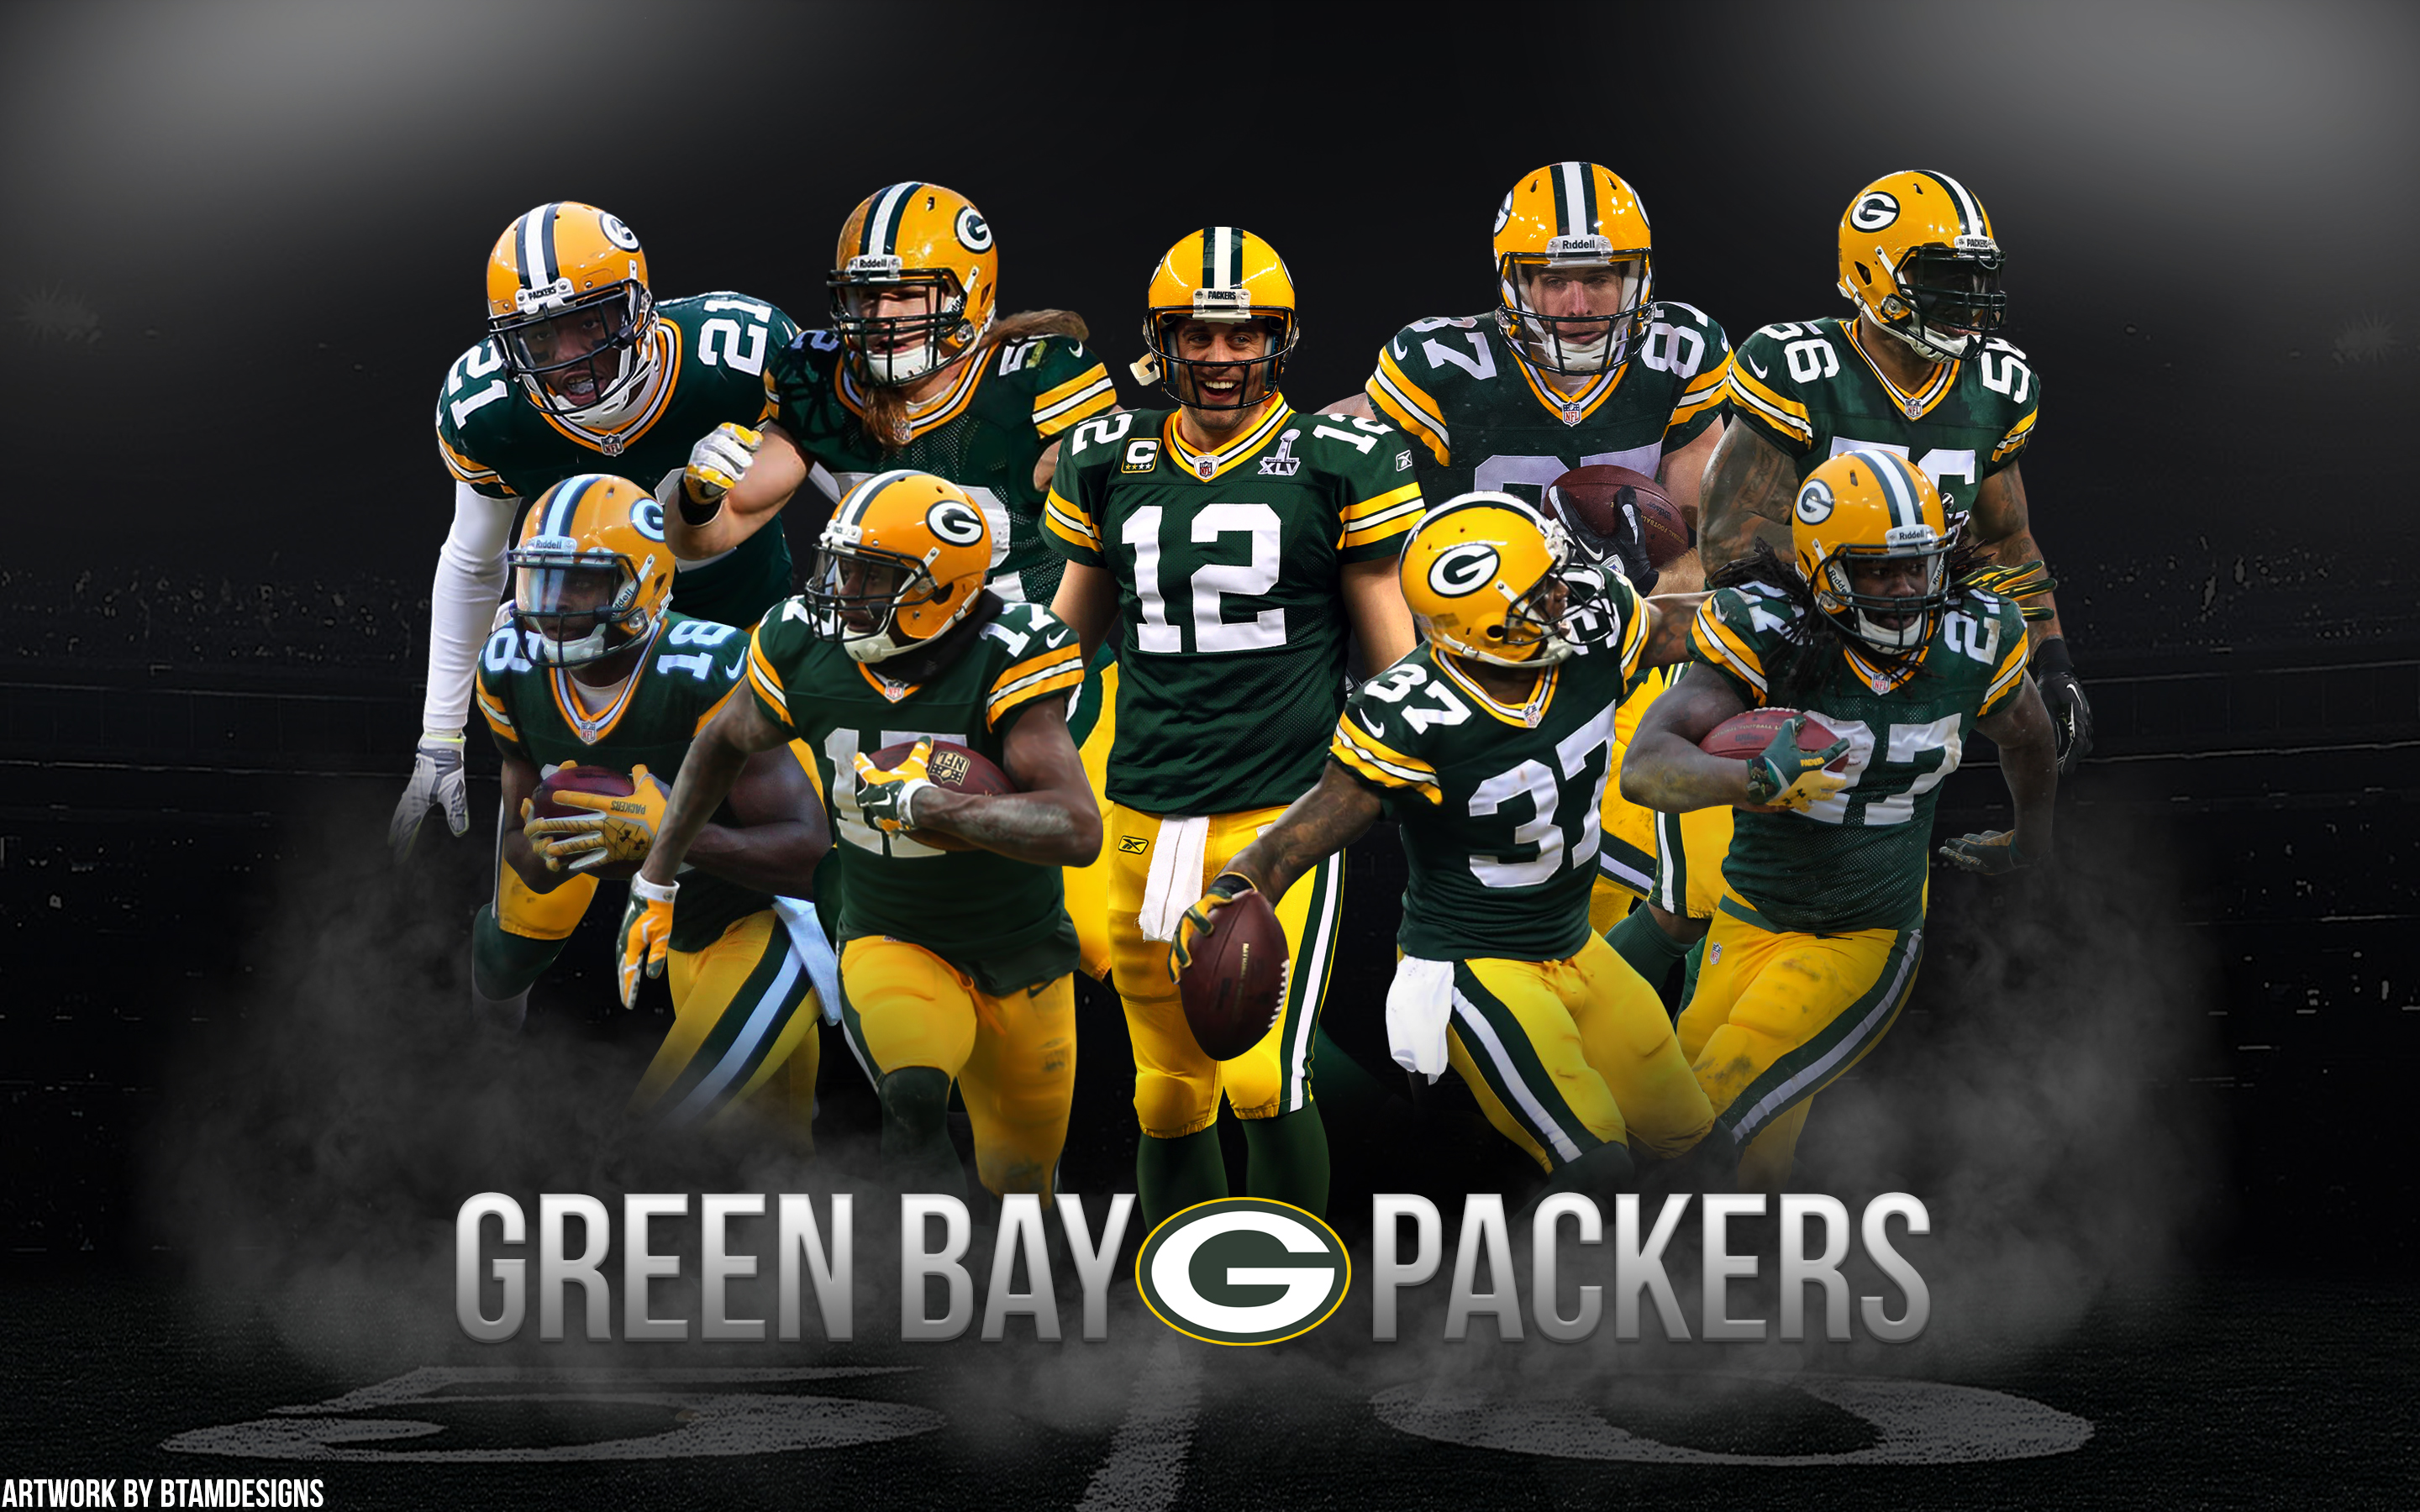 HD Green Bay Packers Backgrounds  Best NFL Wallpapers  Green bay packers  wallpaper Green bay packers pictures Green bay packers logo